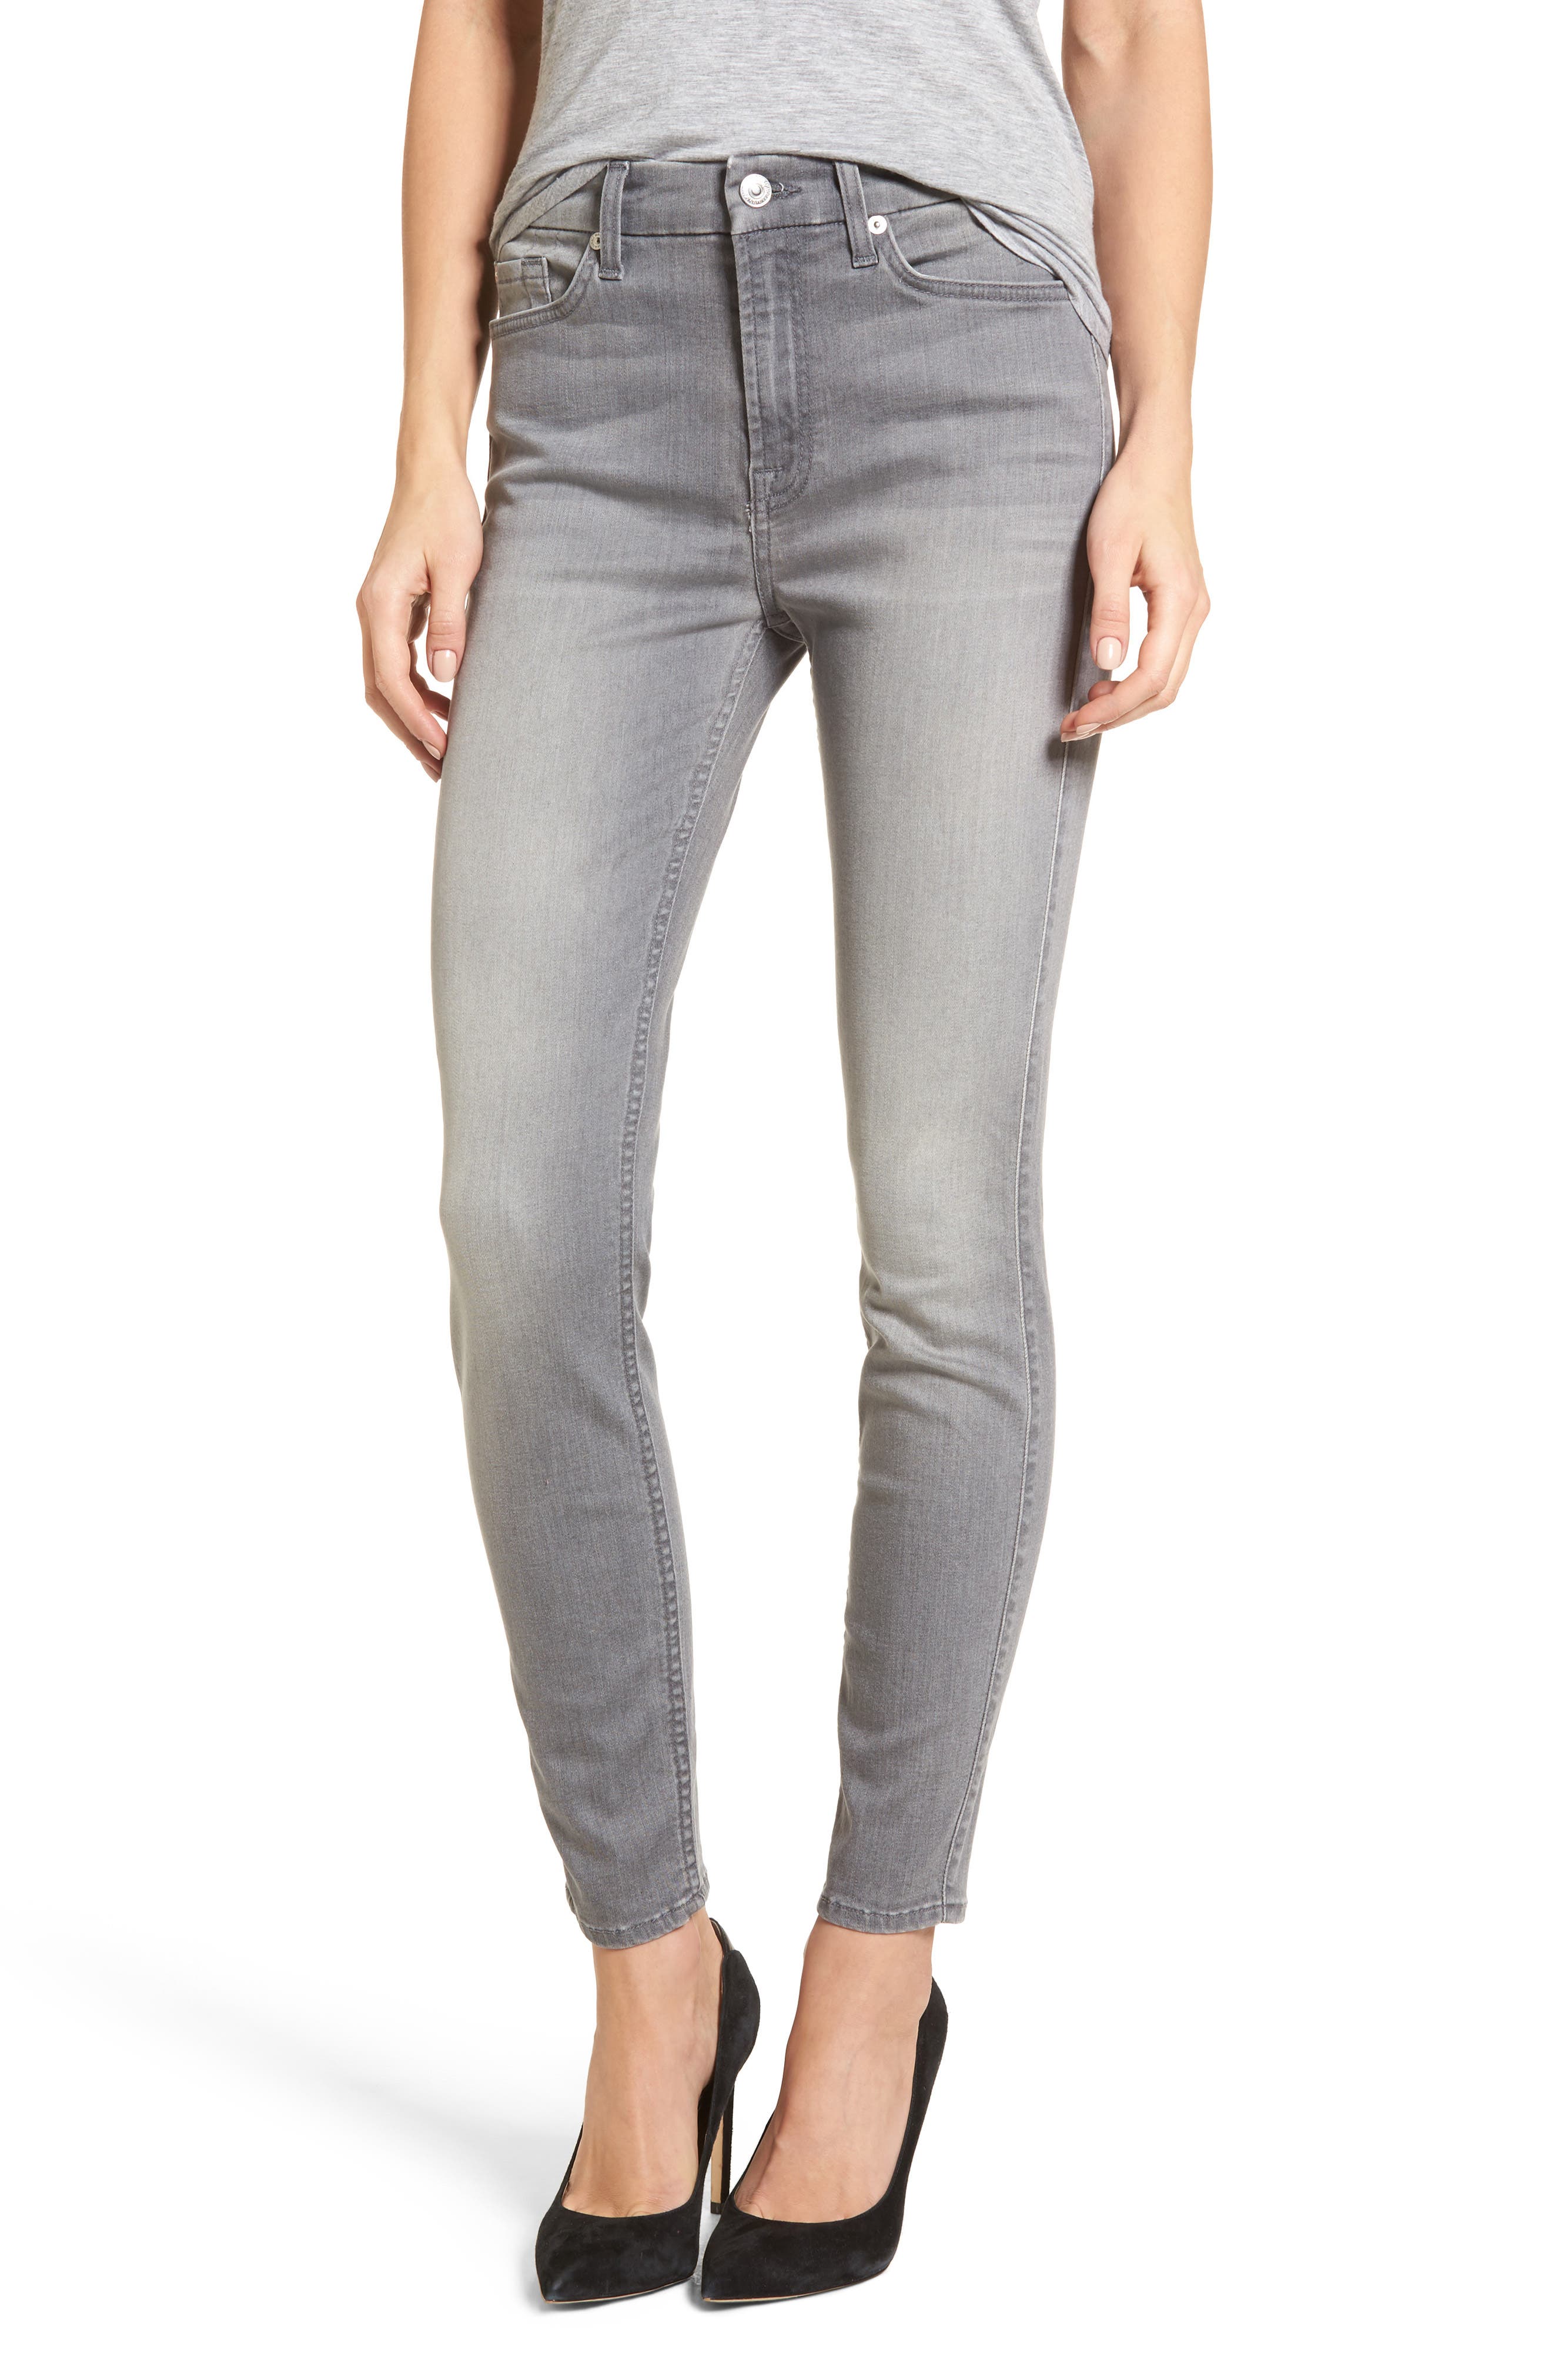 7 for all mankind grey jeans